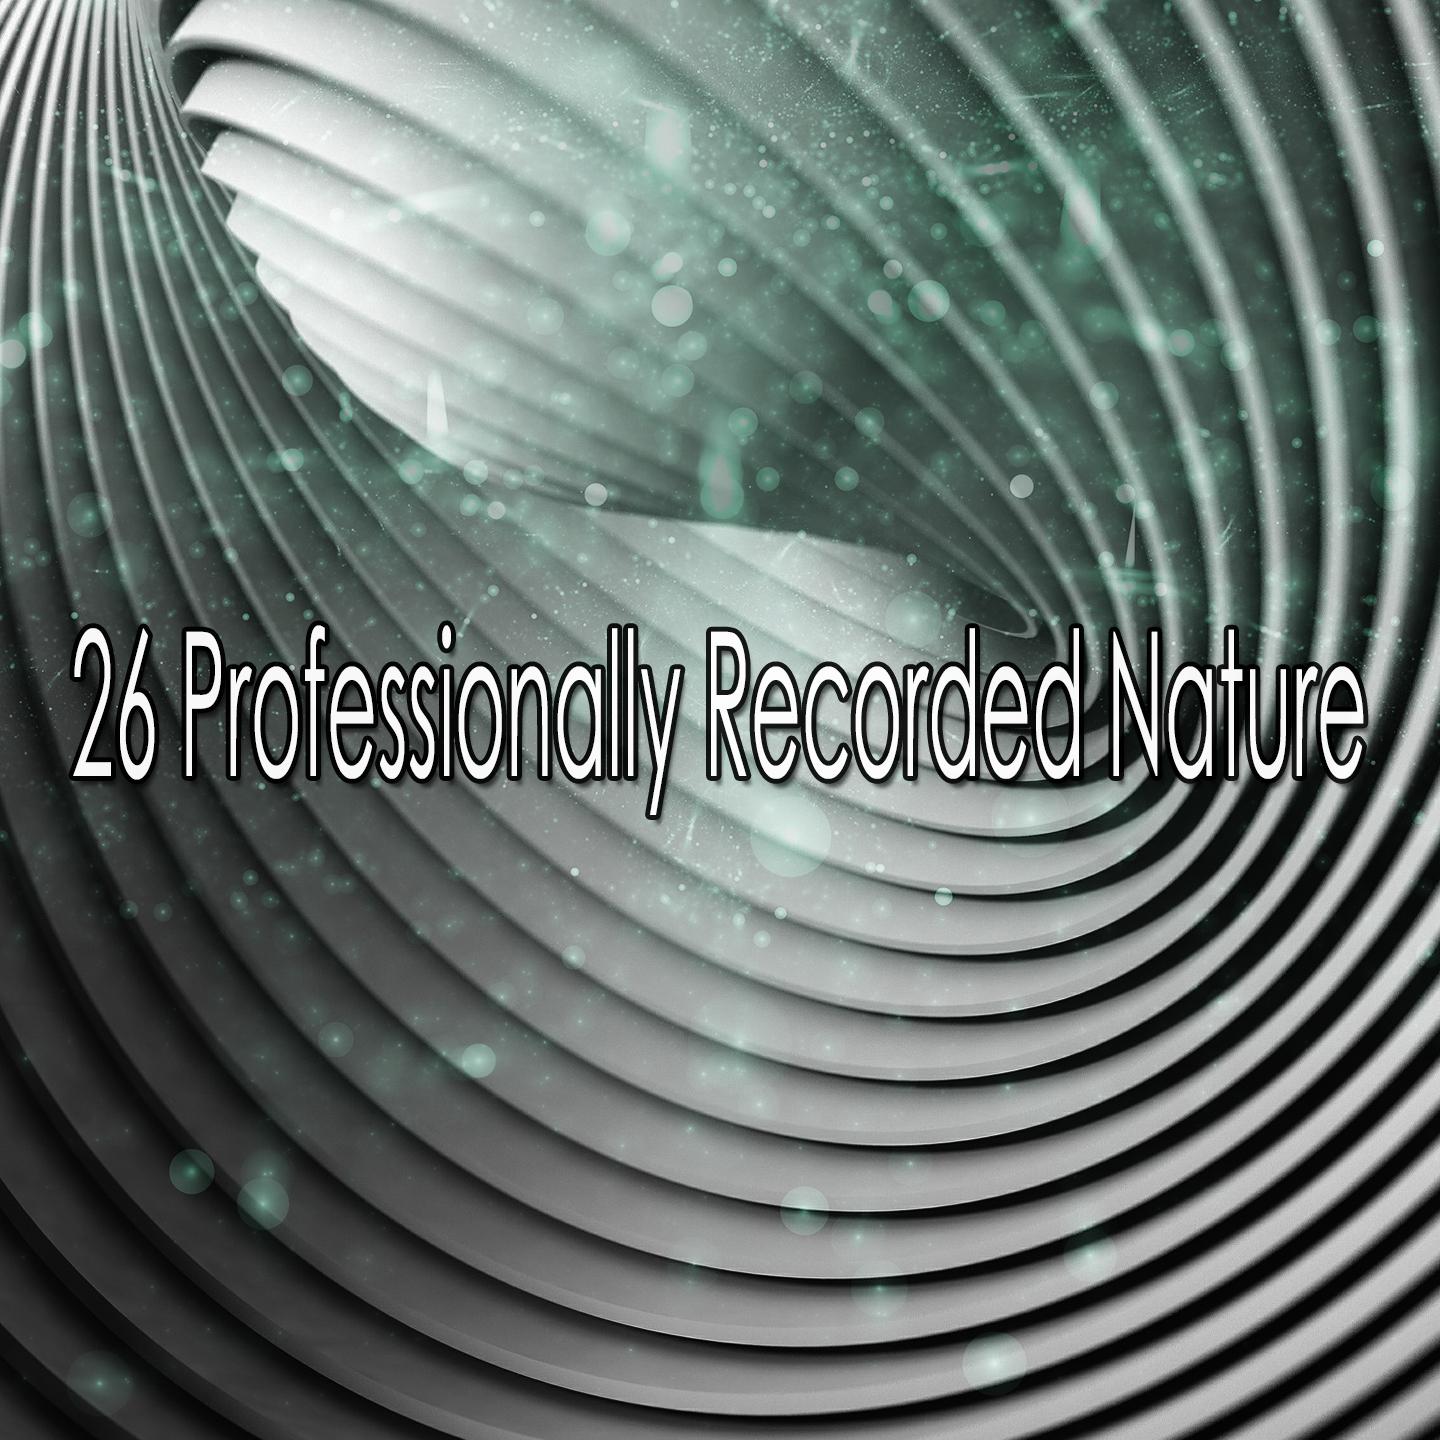 26 Professionally Recorded Nature